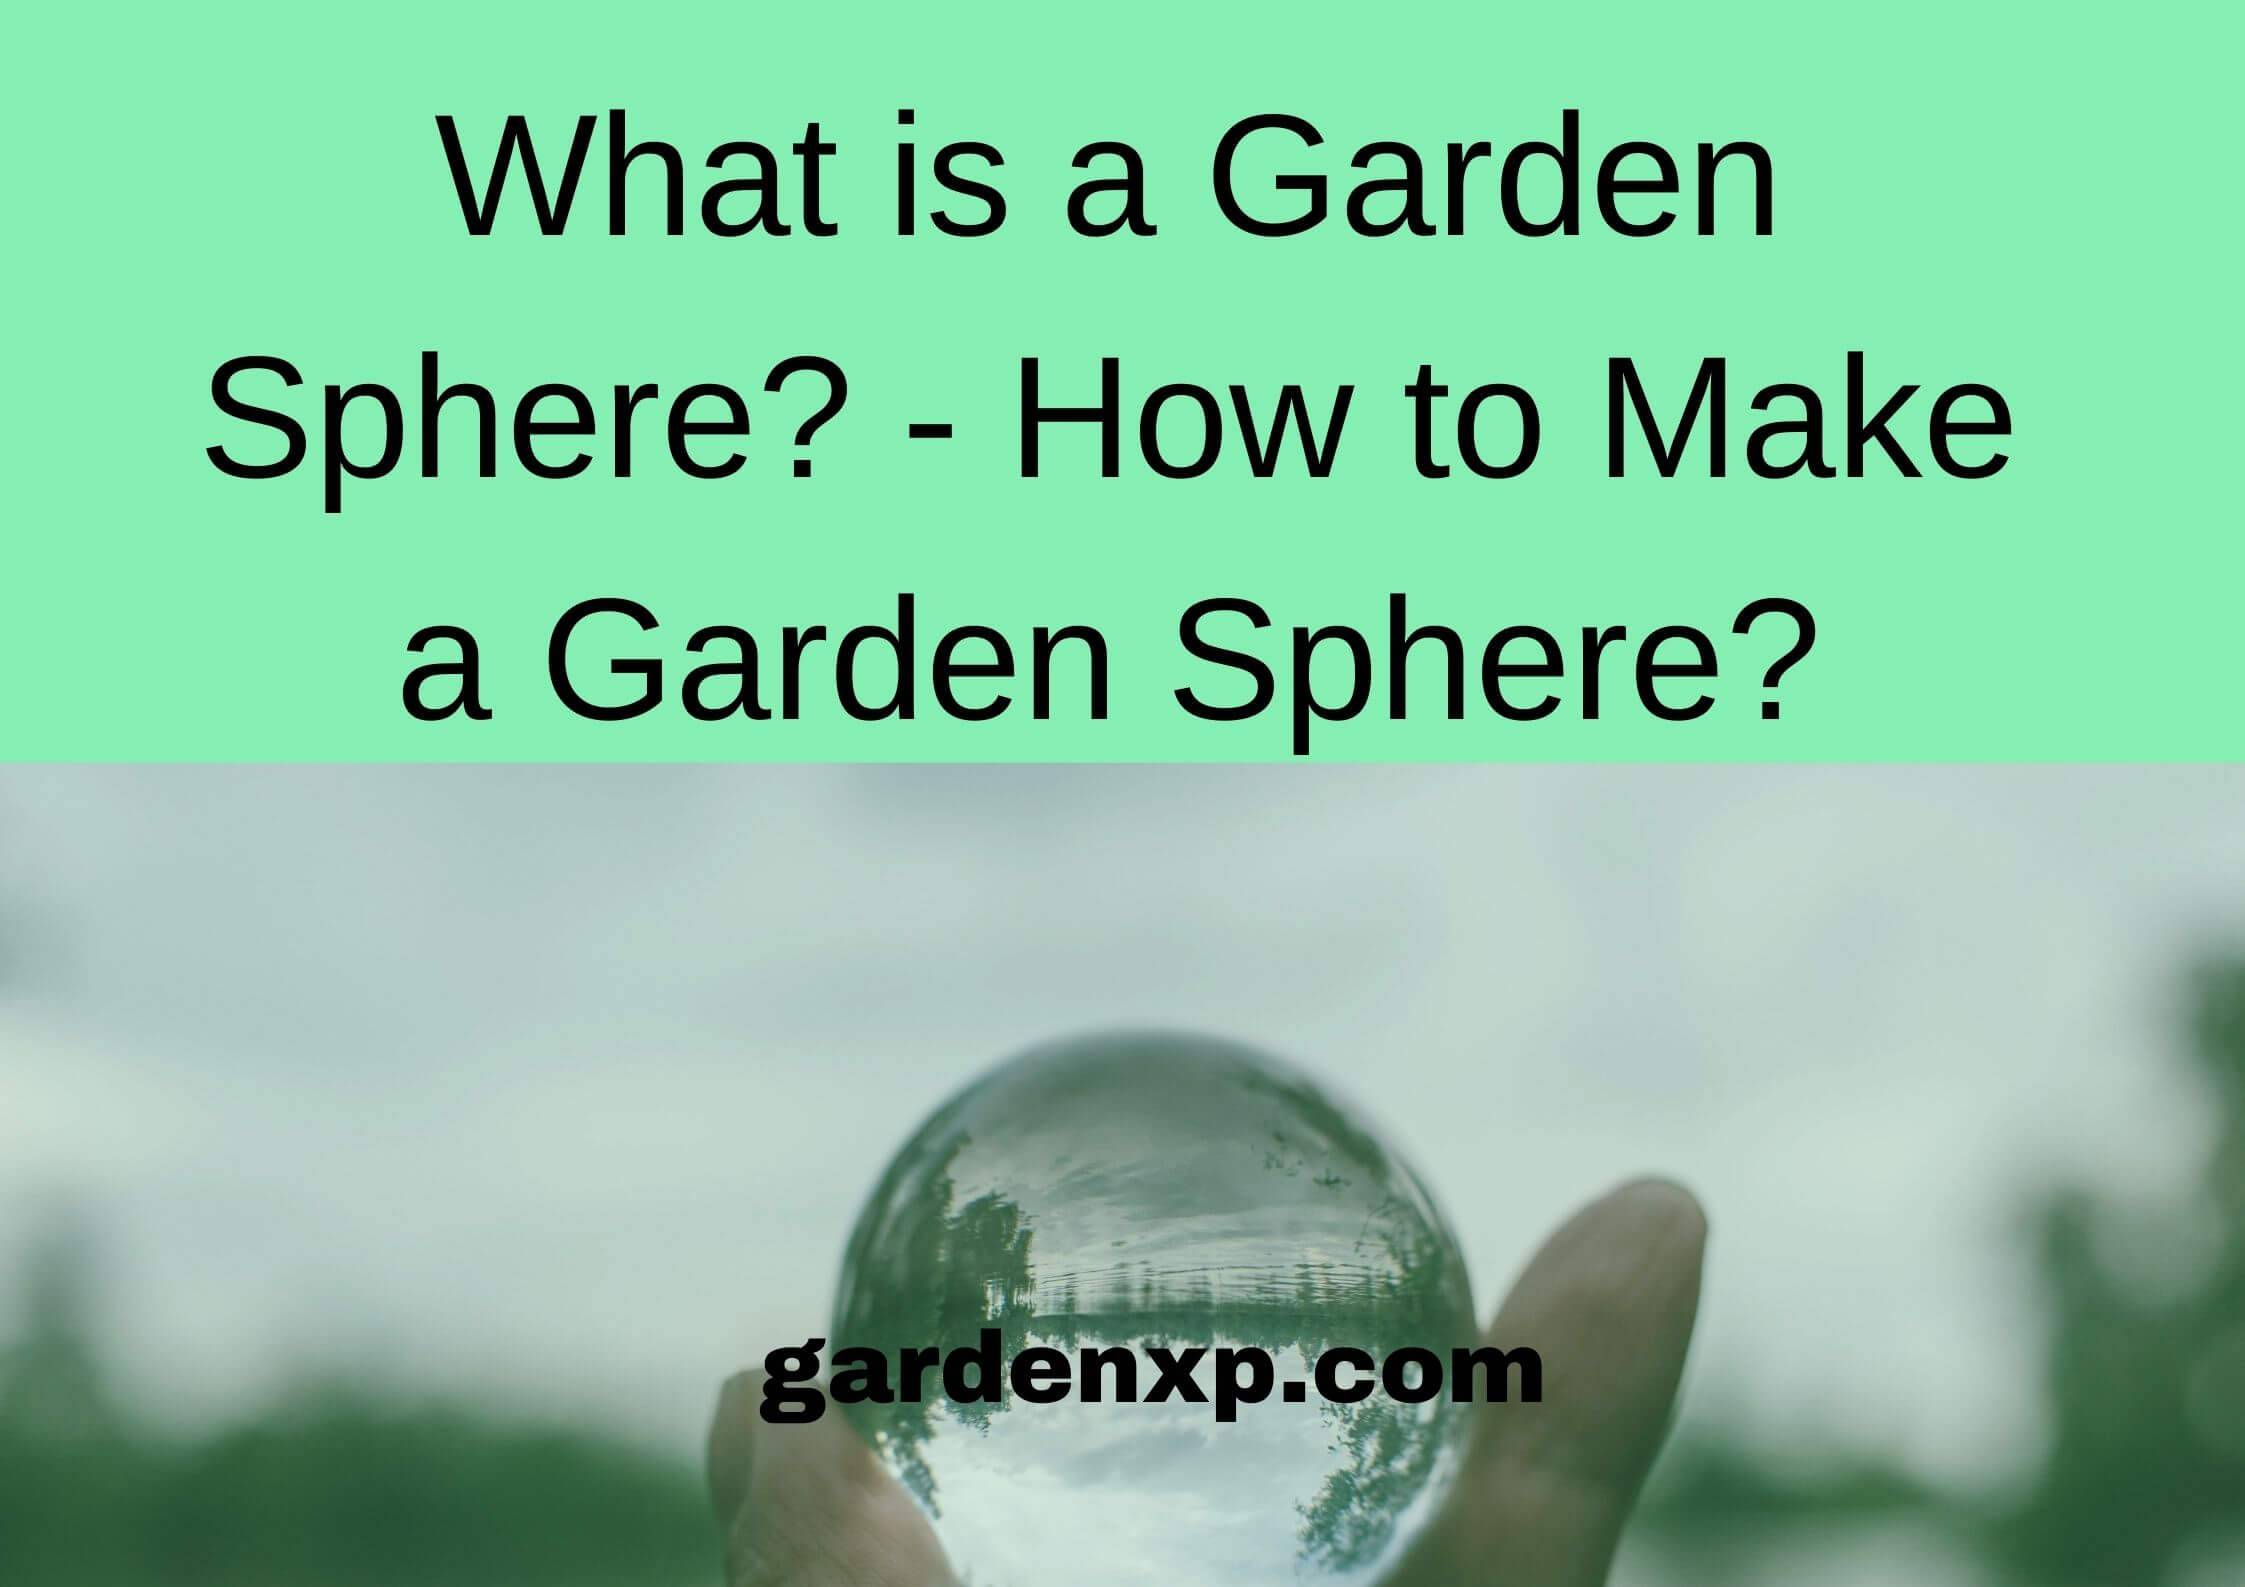 What is a Garden Sphere? - How to Make a Garden Sphere?